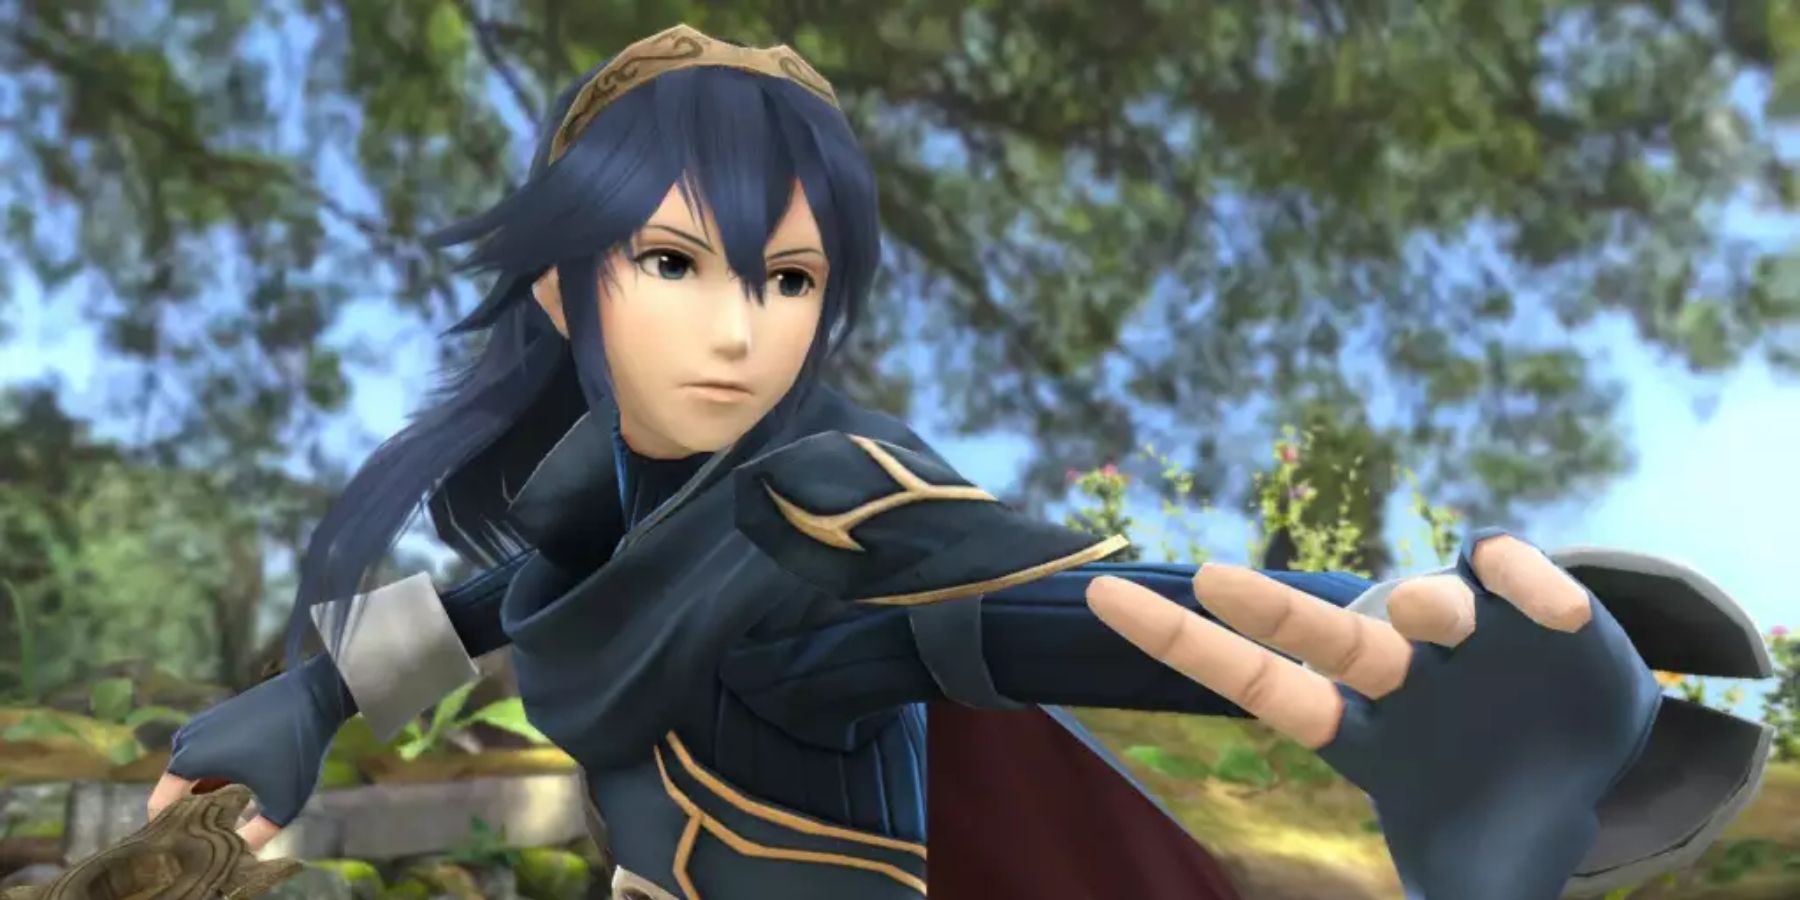 Lucina in an attack stance